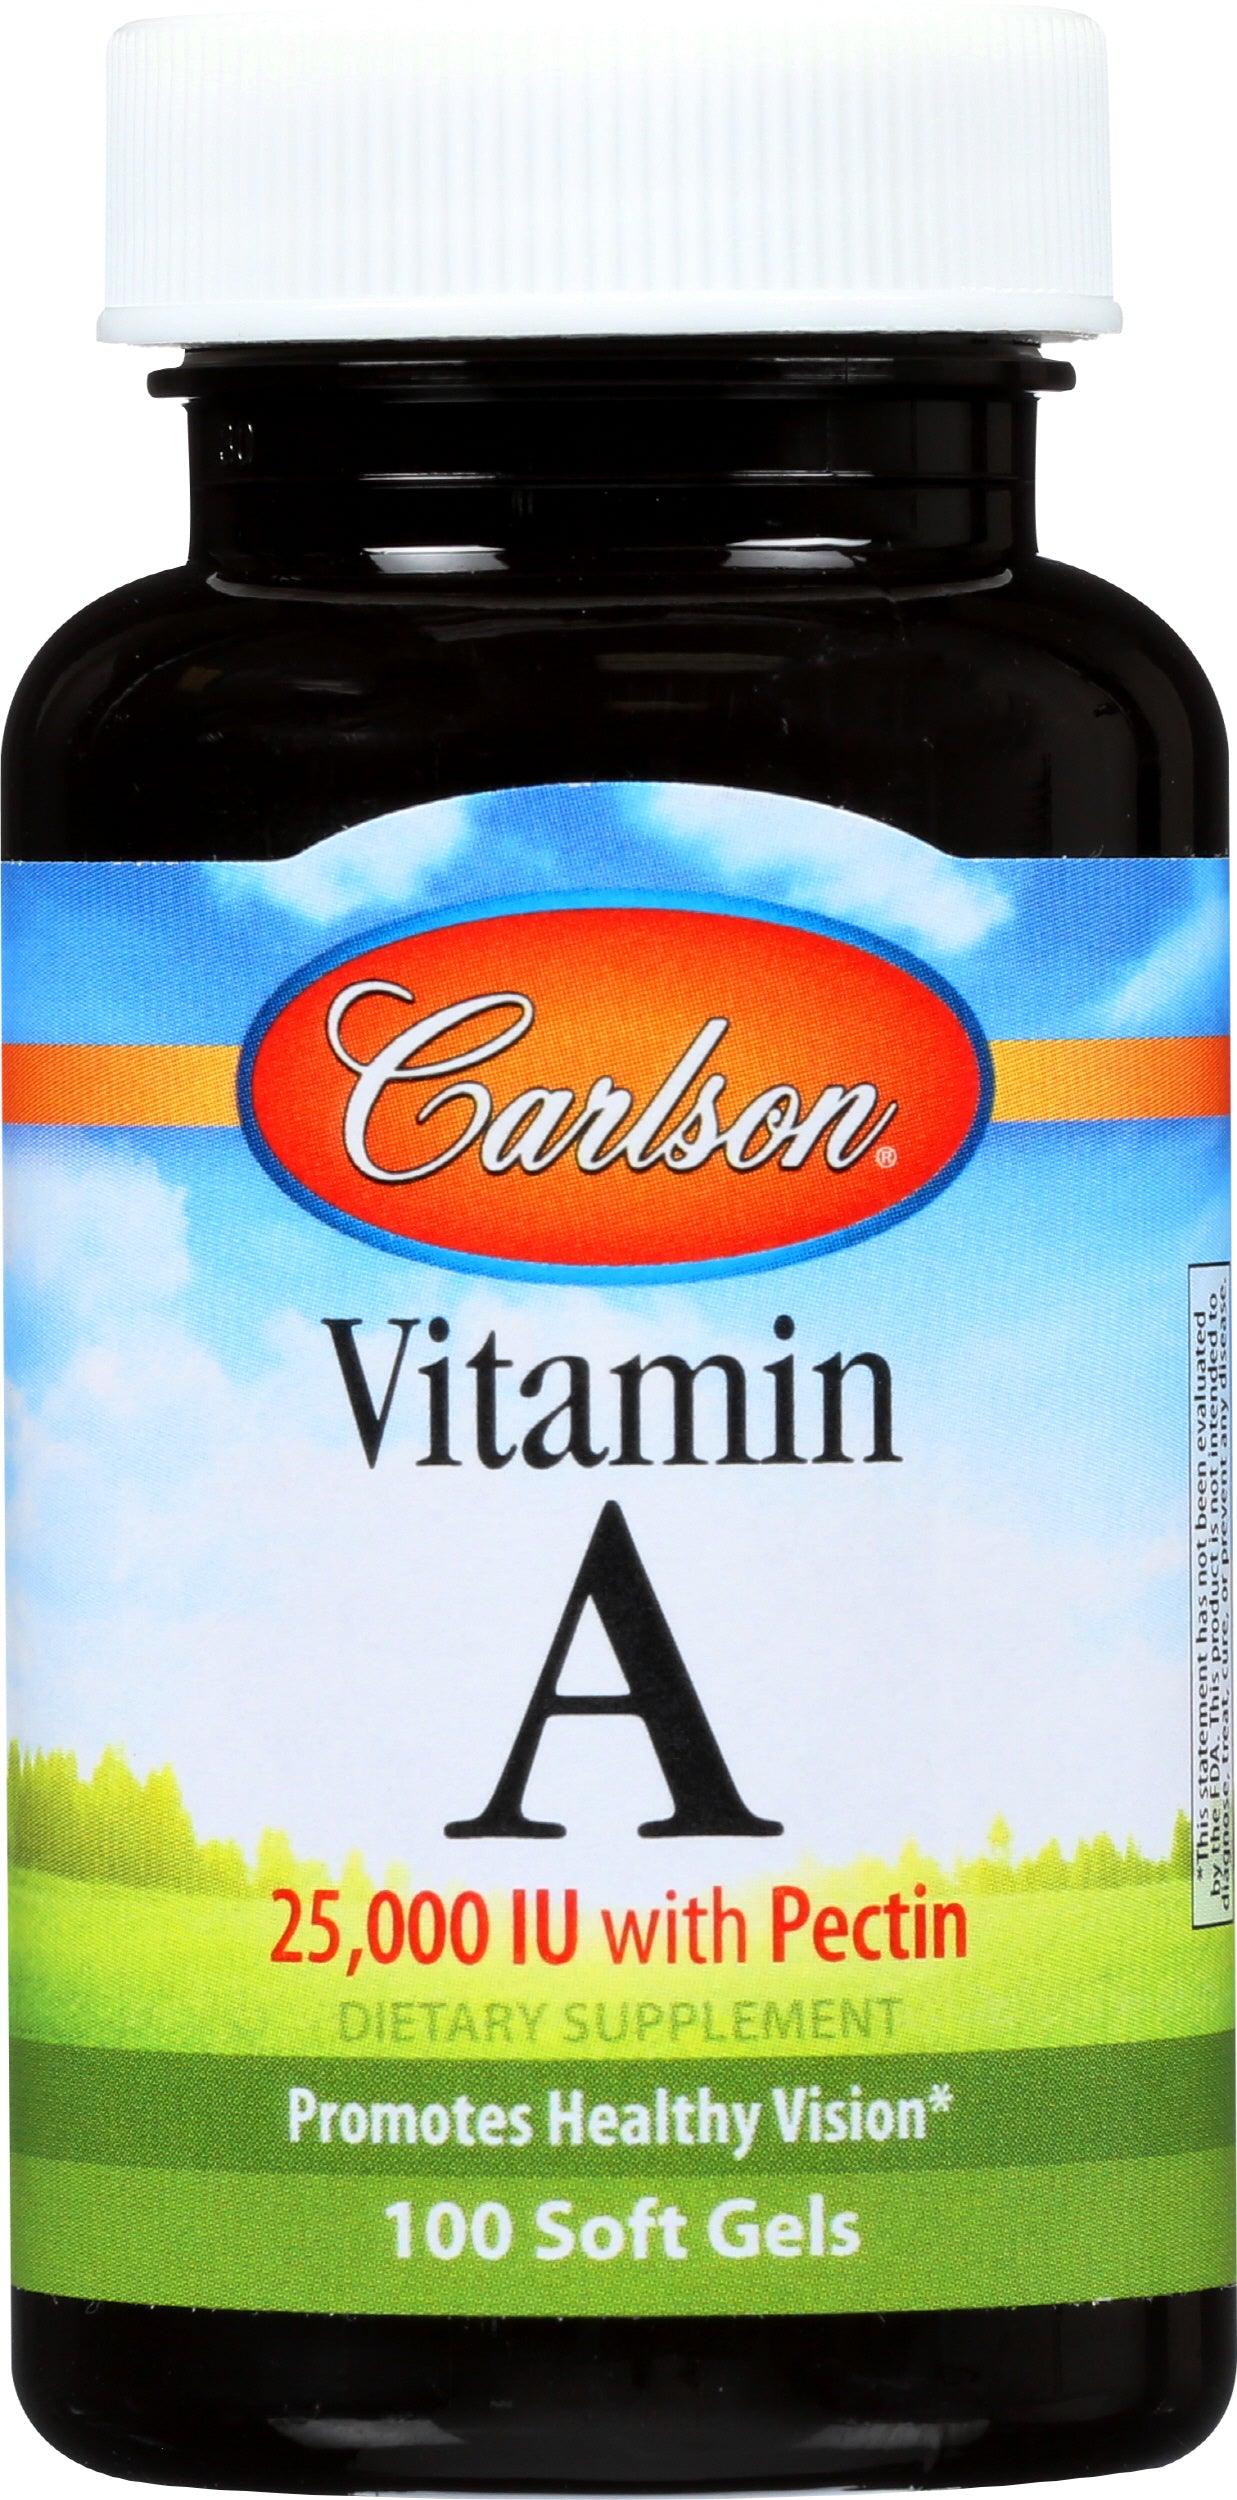 Carlson Vitamin A 25,000 IU with Pectin 100 Soft Gels Front of Bottle